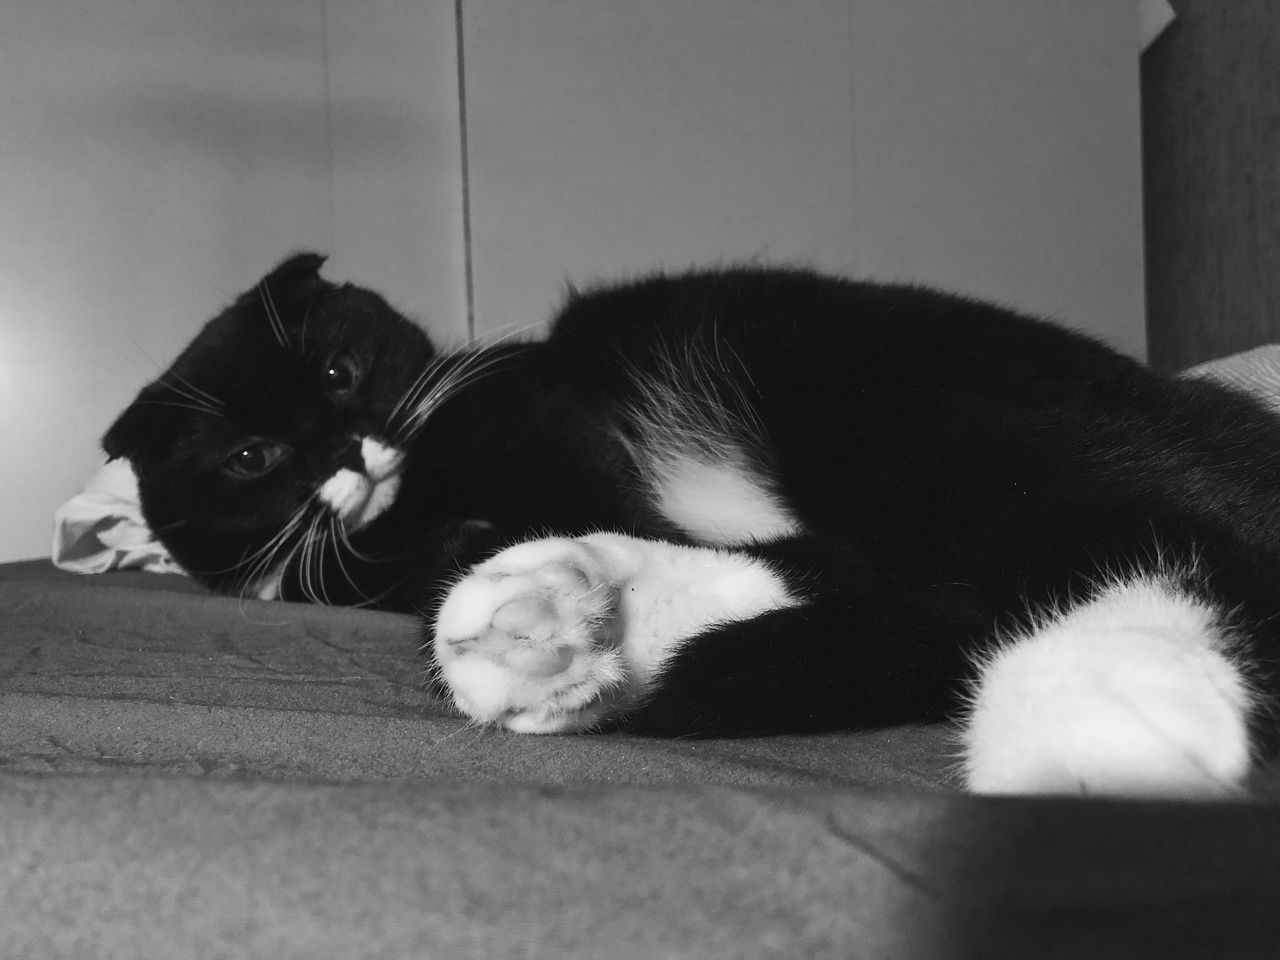 CLOSE-UP PORTRAIT OF A CAT RESTING ON FLOOR